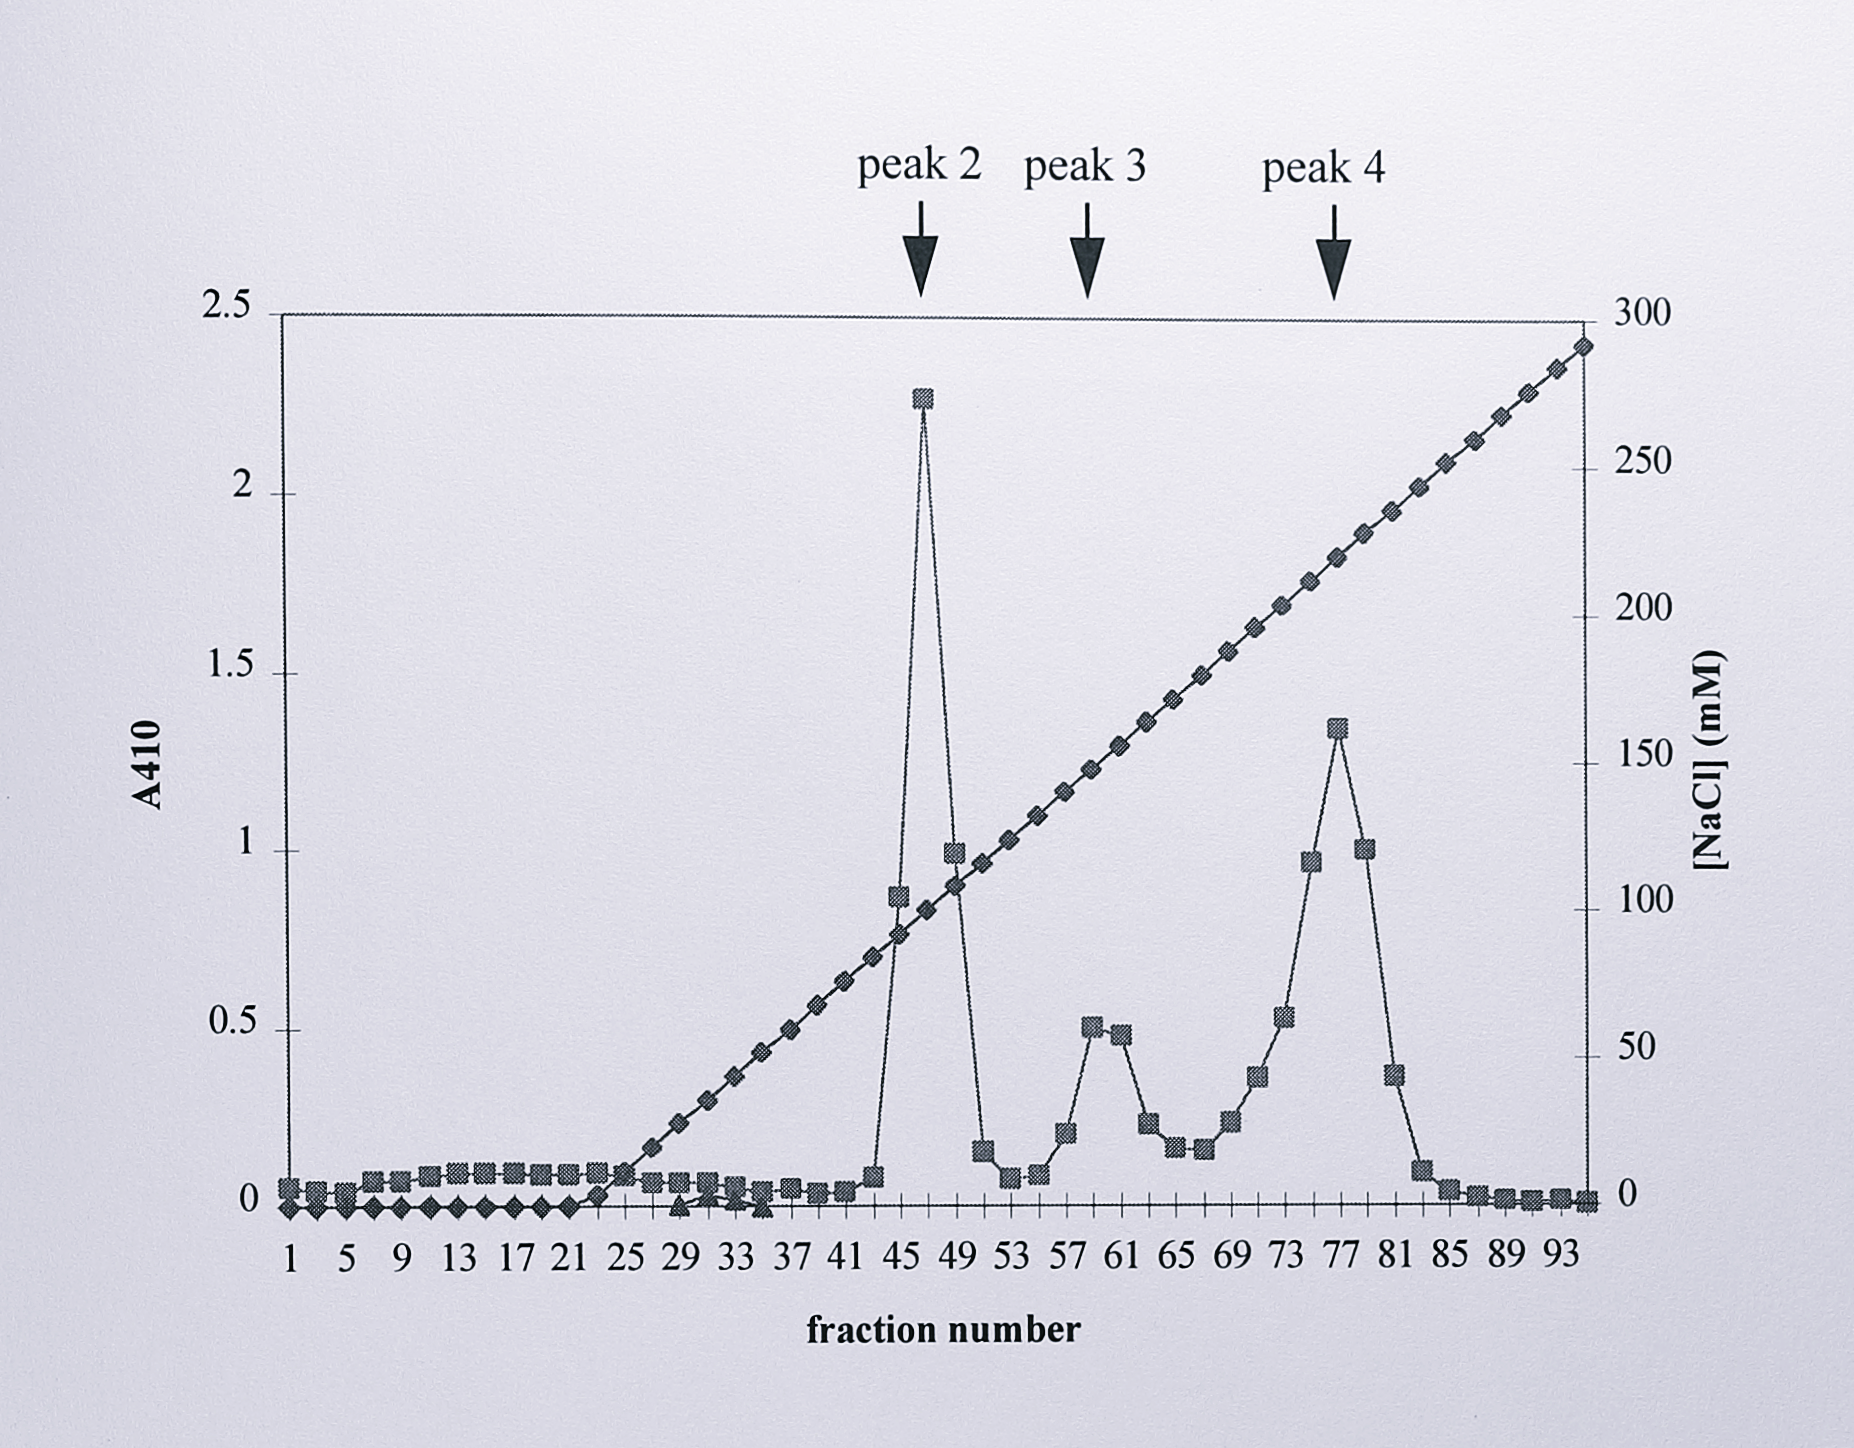 Elution profile during ion exchange chromatography of soluble extract from anaerobically grown _T. pantotropha_ $\Delta7$ [pMMBY25F]. 20 l of _T. pantotropha_ $\Delta7$ [pMMBY25F] were grown anaerobically in minimal succinate medium plus 20 mM nitrate. A total soluble extract prepared from the cells was bound to a DEAE-Sepharose column (2 x 20 cm) and eluted with a 350 ml linear gradient of 0-400 mM NaCl in 50 mM Tris-HCl pH 8.0 (&#9670;). Elution of haem proteins was followed by measuring the absorbance of the fractions at 410 nm (&#9632;). Elution of the blue copper protein pseudoazurin in fractions 28-35 was monitored by absorbance at 595 nm (&#9650;). The three major elution peaks are labelled numbers 2-4. As described in the text, a fourth _c_-type cytochrome eluted from the column either in the early fractions or during washing. In the above experiment this protein eluted during washing and was collected; however it is still referred to as peak 1.